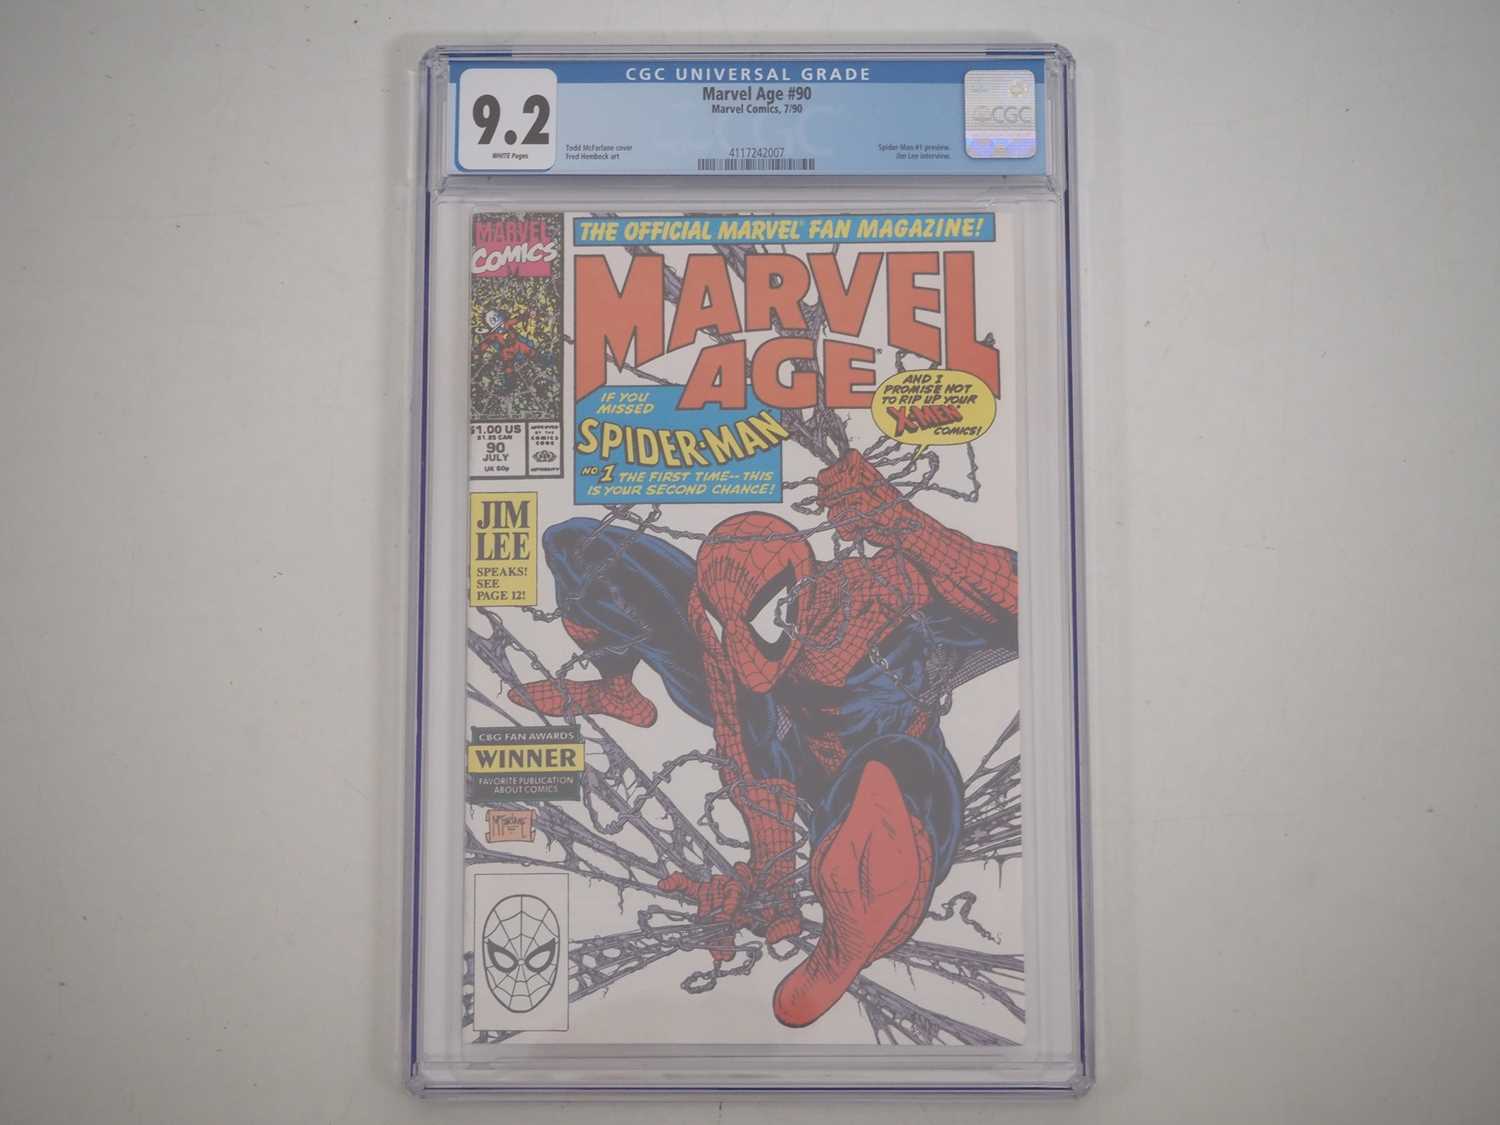 MARVEL AGE #90 (1990 - MARVEL) - GRADED 9.2 (NM-) by CGC - Spider-Man #1 preview with cover art by